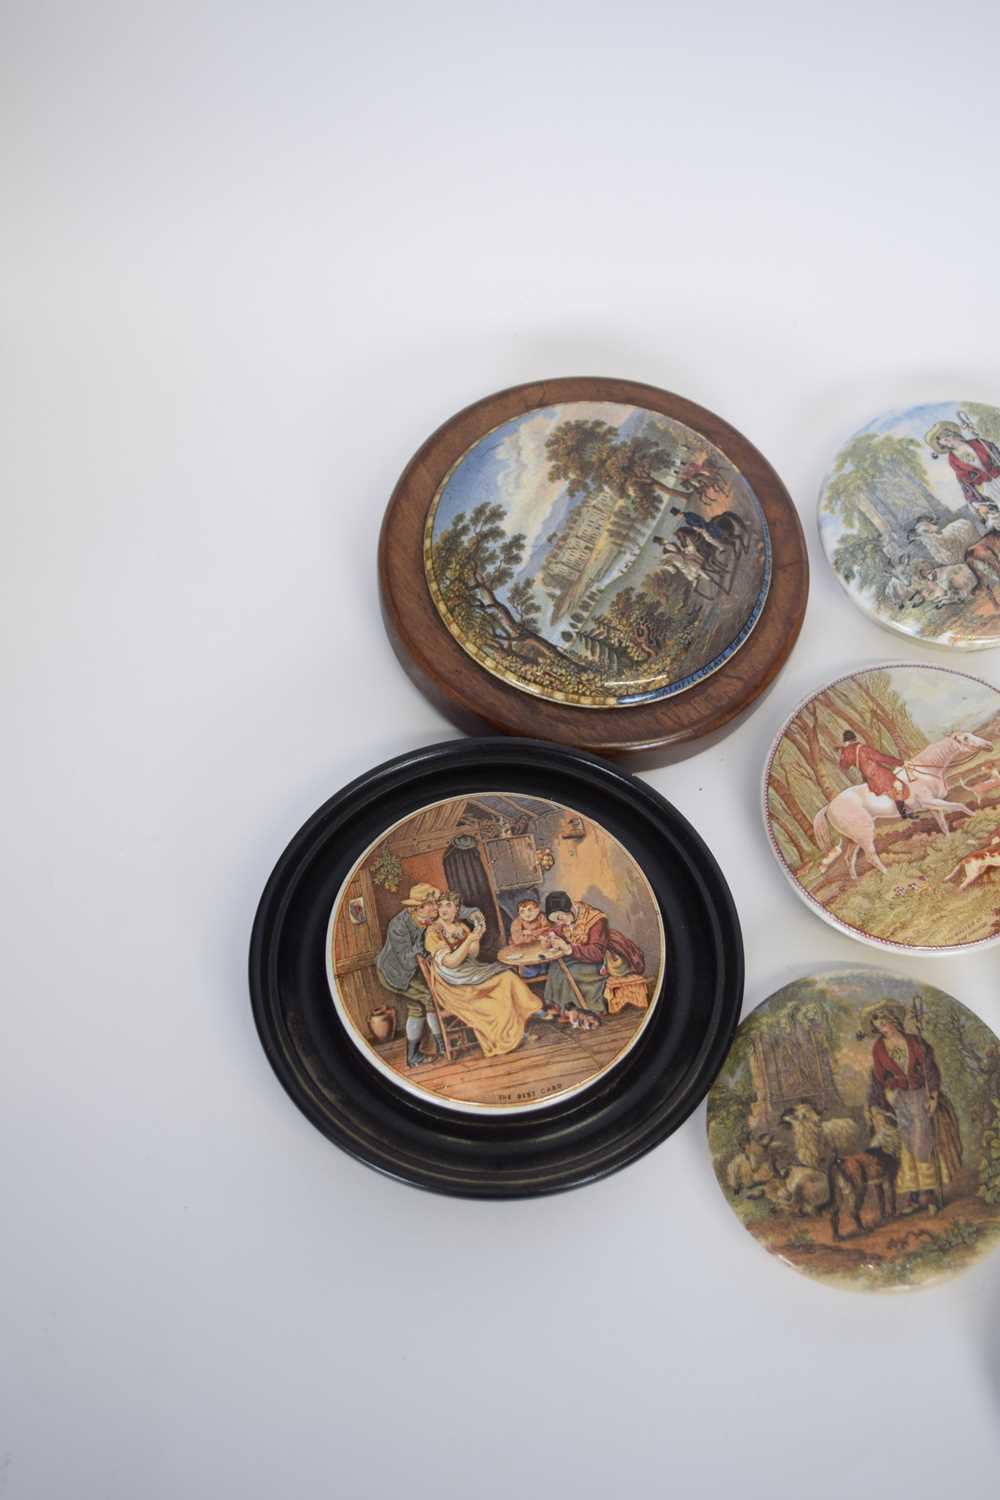 Collection of pot lids, some with wooden mounts including 'On guard', horse racing scene, HRH Prince - Image 2 of 4